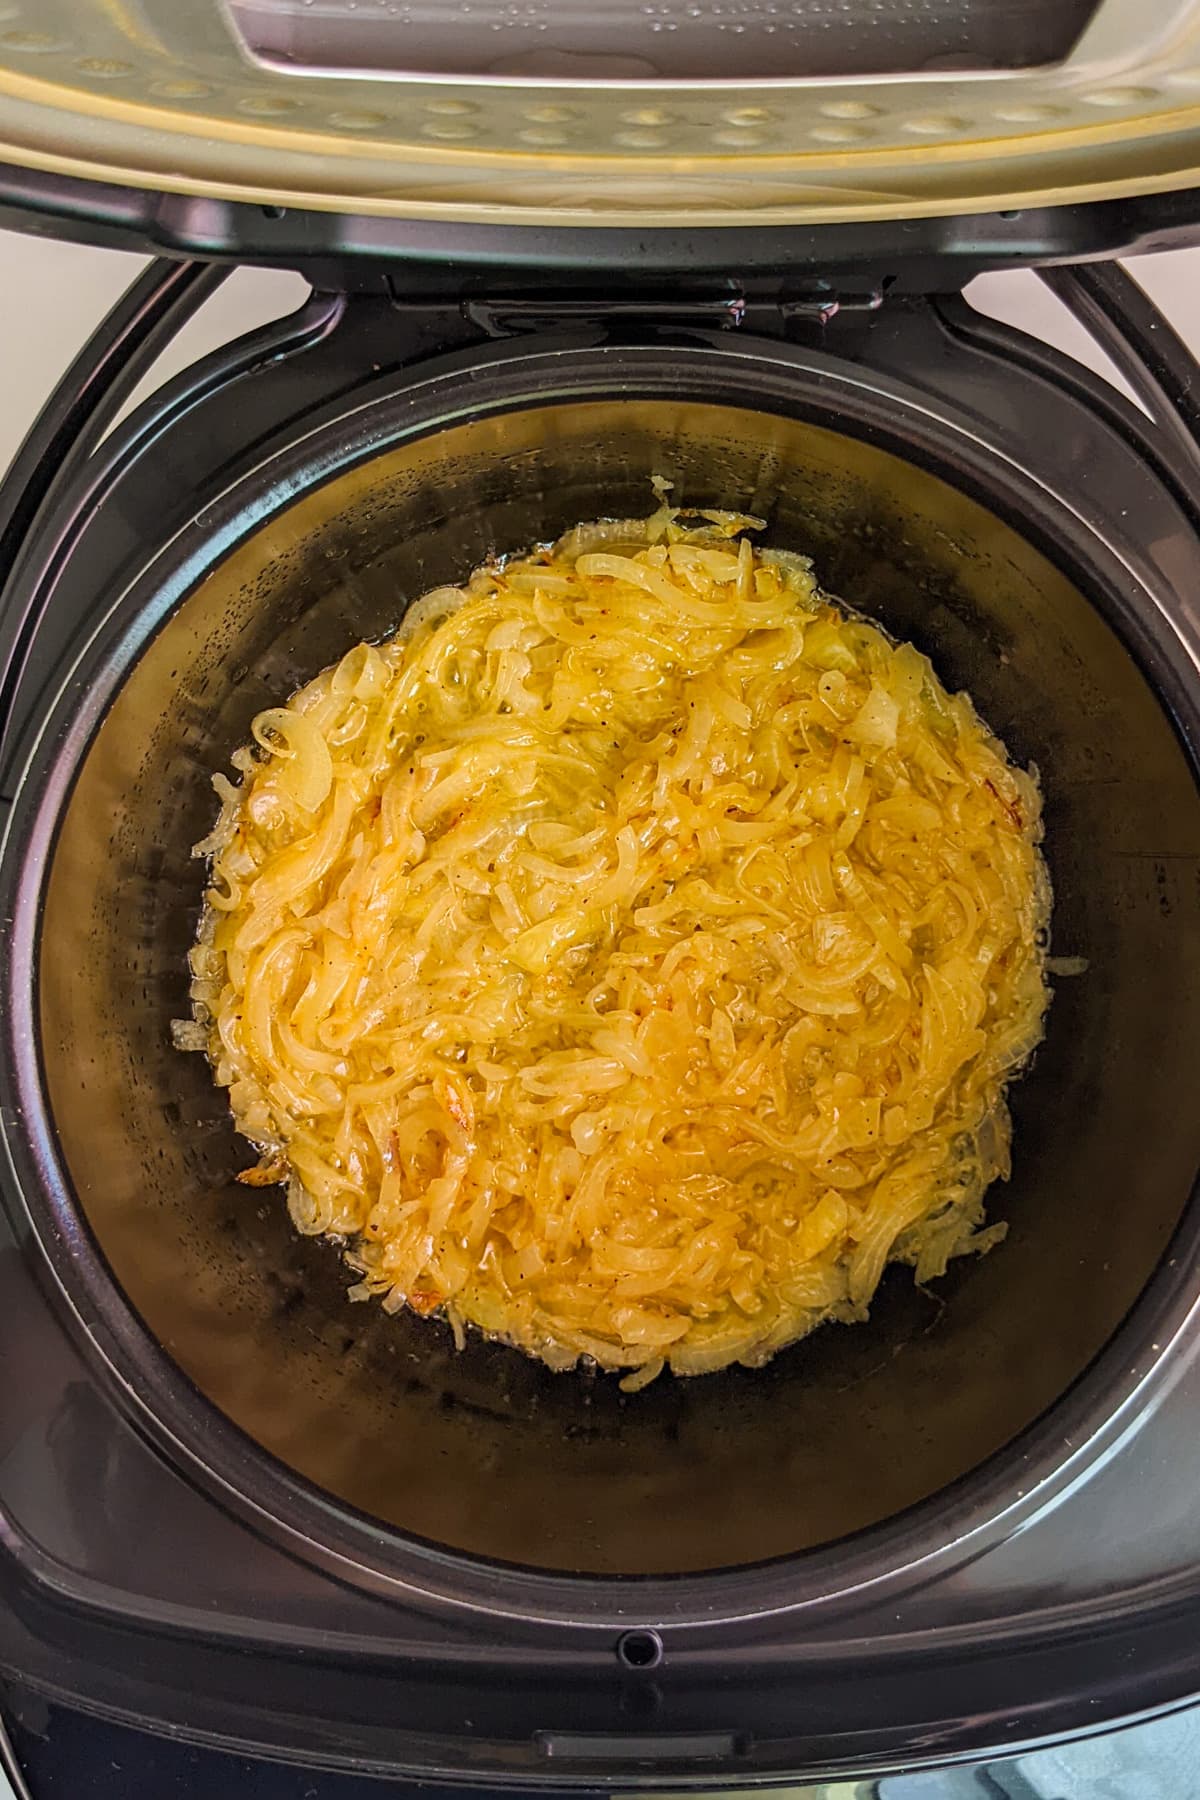 Top view of a slow cooker with caramelized onions.